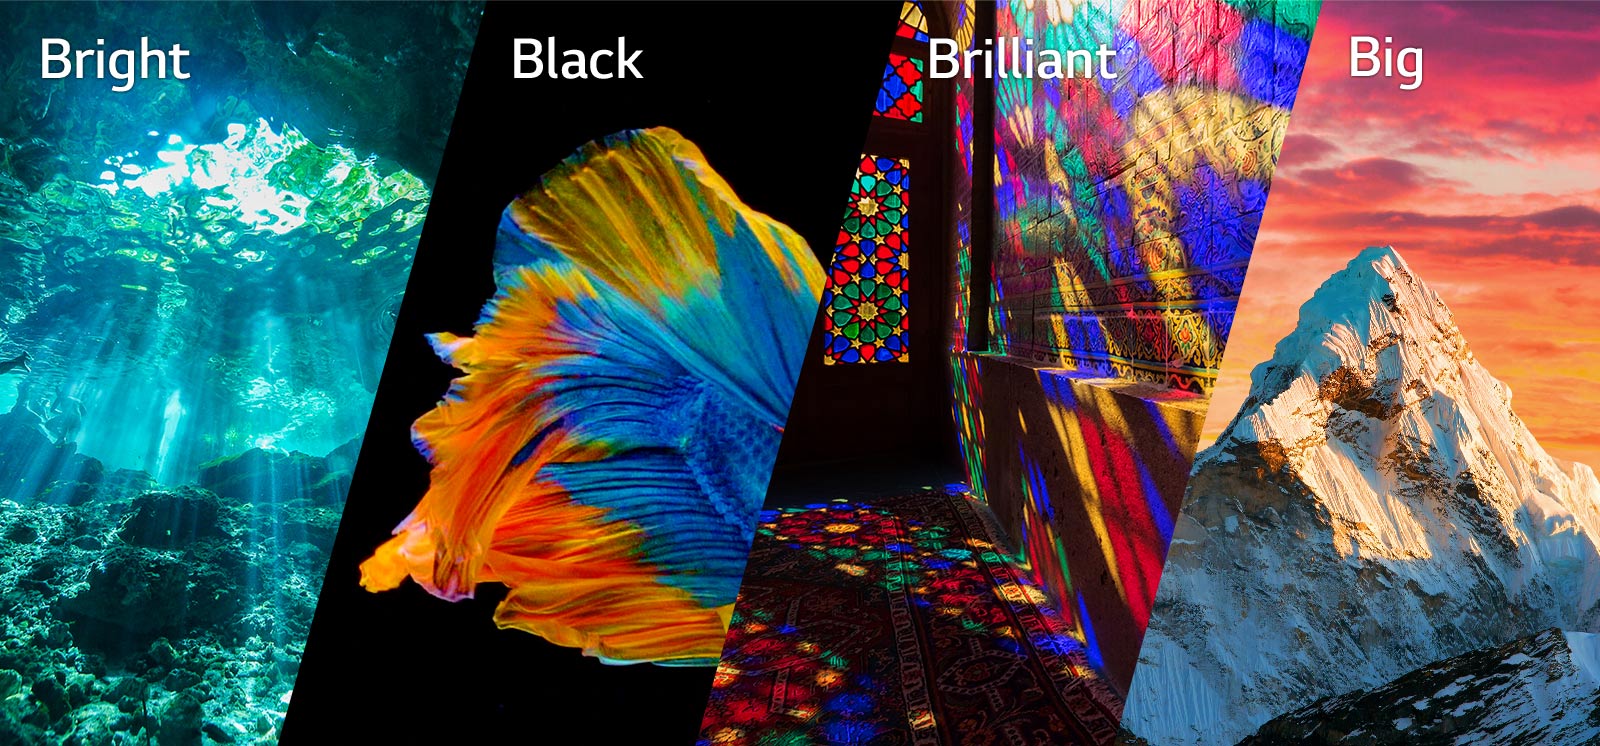 Depth of detail with LG QNED MiniLED TV showing deeper blacks and brilliant colors 